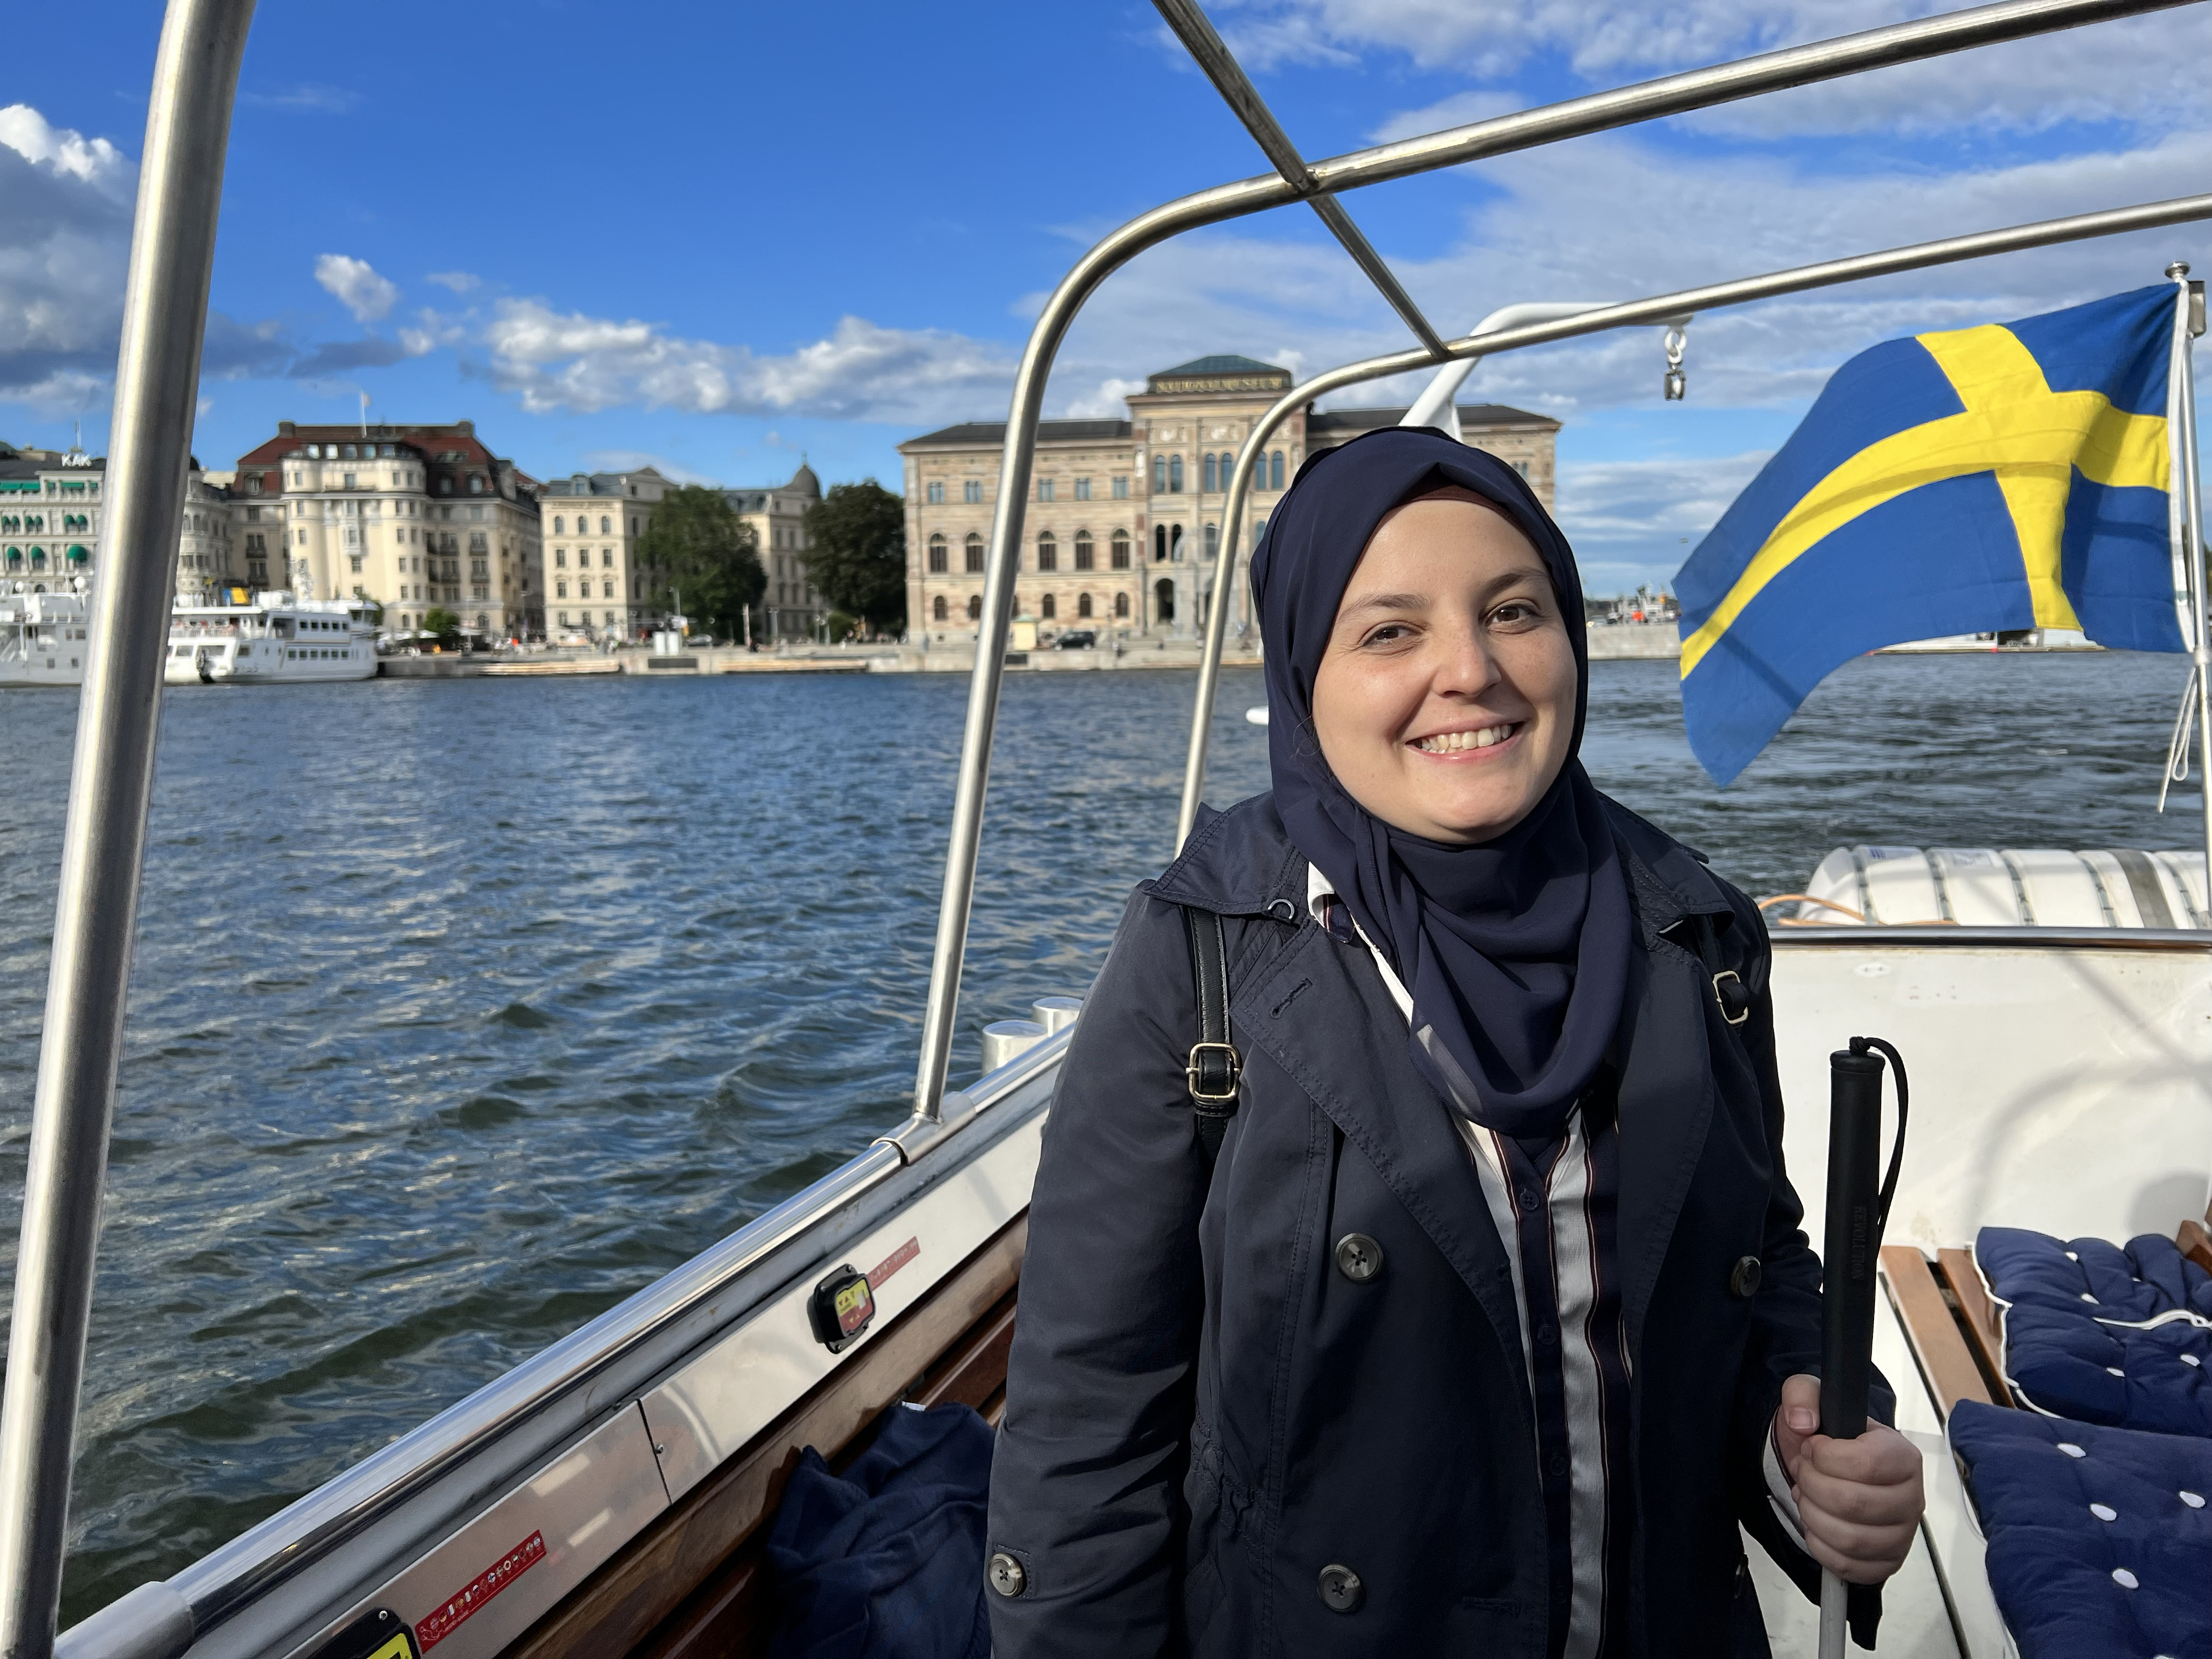 A beautiful picture of mona smiling at the camera. She is standing inside a sailing boat facing the camera holding her stick on with her left hand. There is a sweedish flag, attached the boat that is waving in the wind behind her. She is wearing a black coat and a navy blue head scarf. We can see water all around and clear blue skies to the left. We see the harbour at a distance behind her and there are beautiful buildings lined up in the harbour. This looks like a tourist boating location.